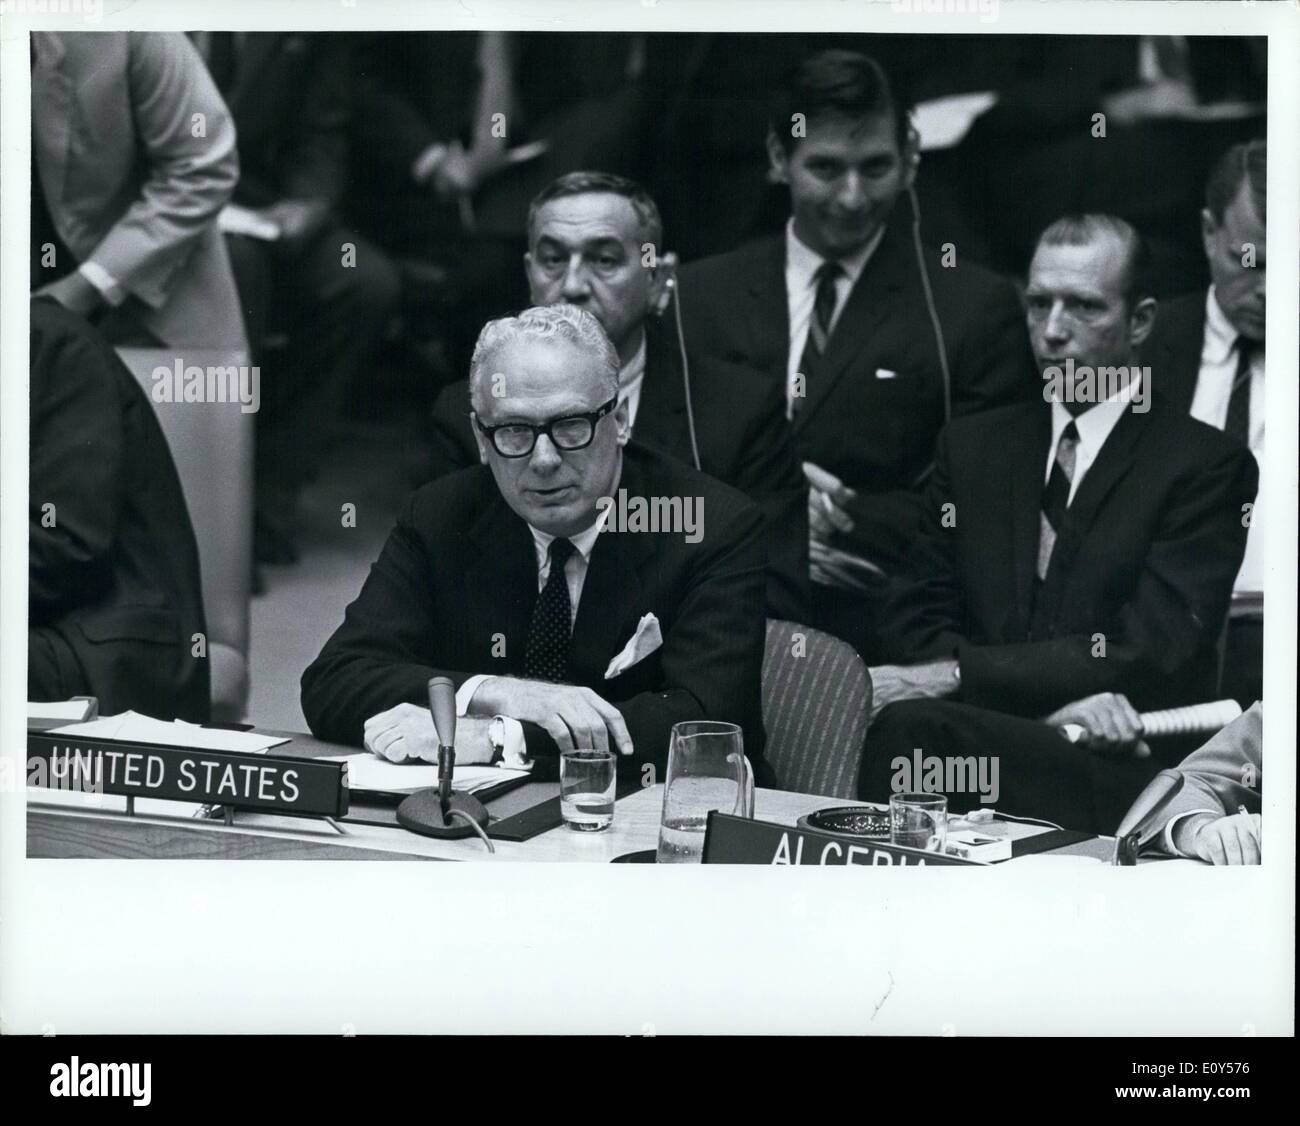 Aug. 08, 1968 - Security Council Begins Debate on Situation in Czechoslovakia. United Nations, New York, 21 August 1968. The Security Council tonight began debate, at the request of six council members, concerning ''the present serious situation in the Czechoslovakia Socialist Republic''. The decision to take up this item -- as requested today by Canada, Denmark, France, Paraguay, the United Kingdom and the United States -- was taken by a vote of 13 in favour to 2 against (Hungary, Soviet Union) Stock Photo